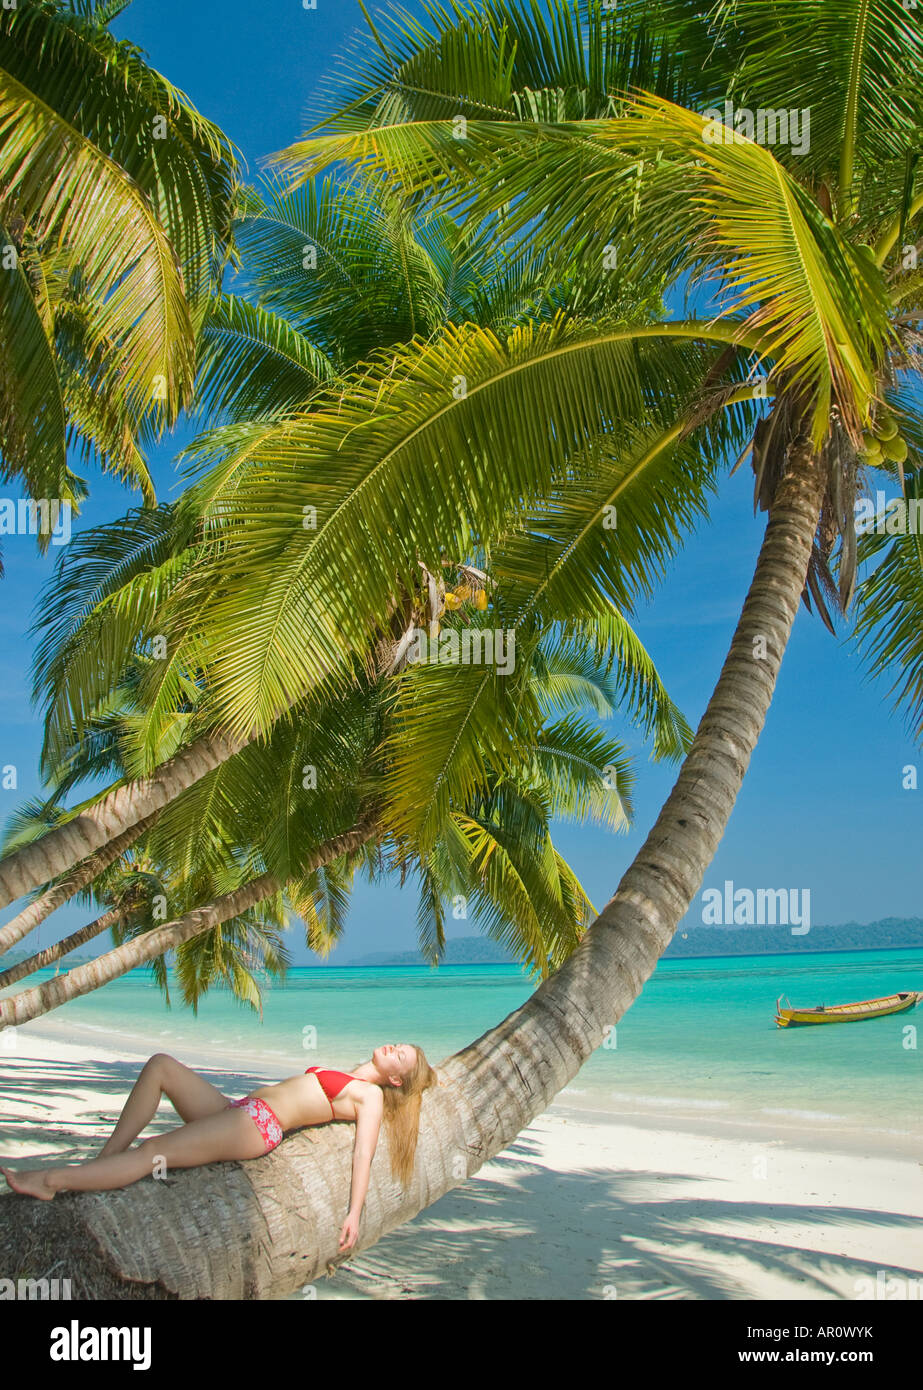 A woman in a red bikini relaxing under a palm tree on a beach in the Andaman Islands Stock Photo